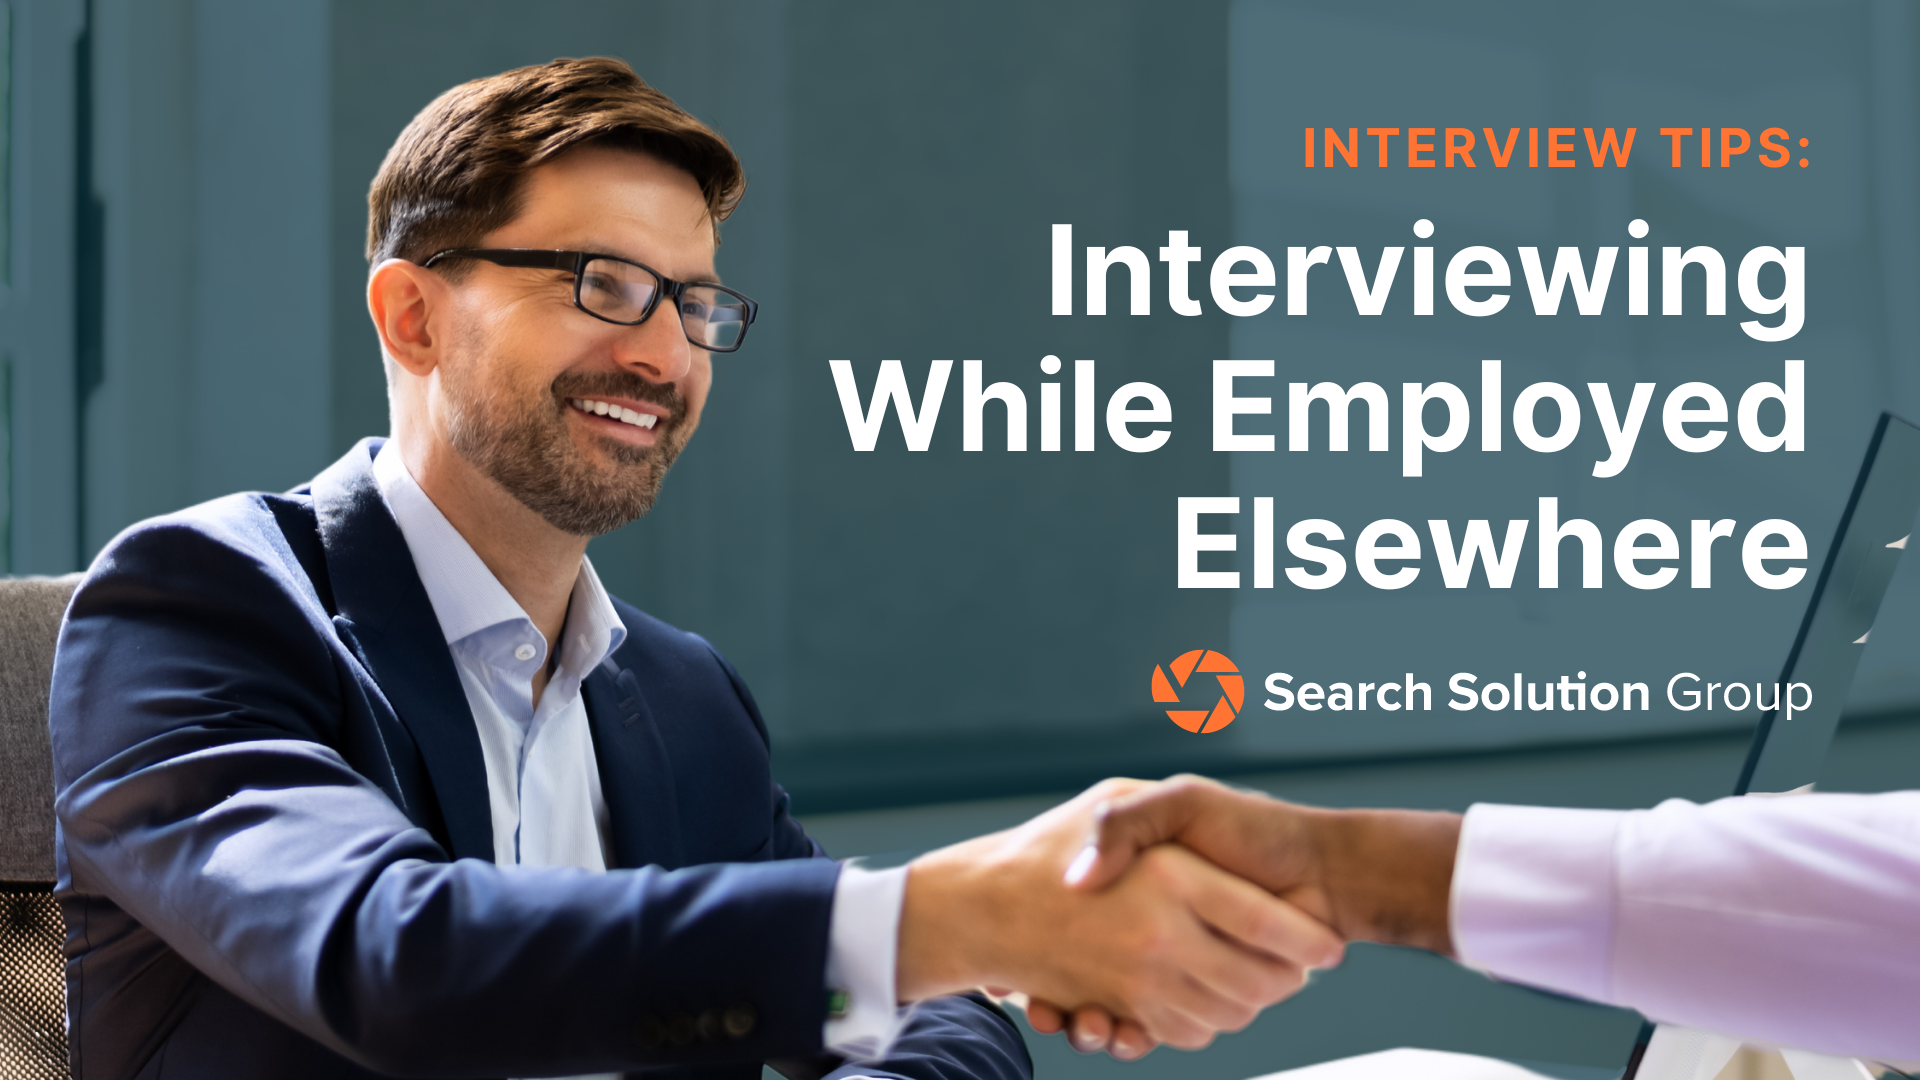 Interview Tips: How to Handle Interviewing While Still Employed Elsewhere